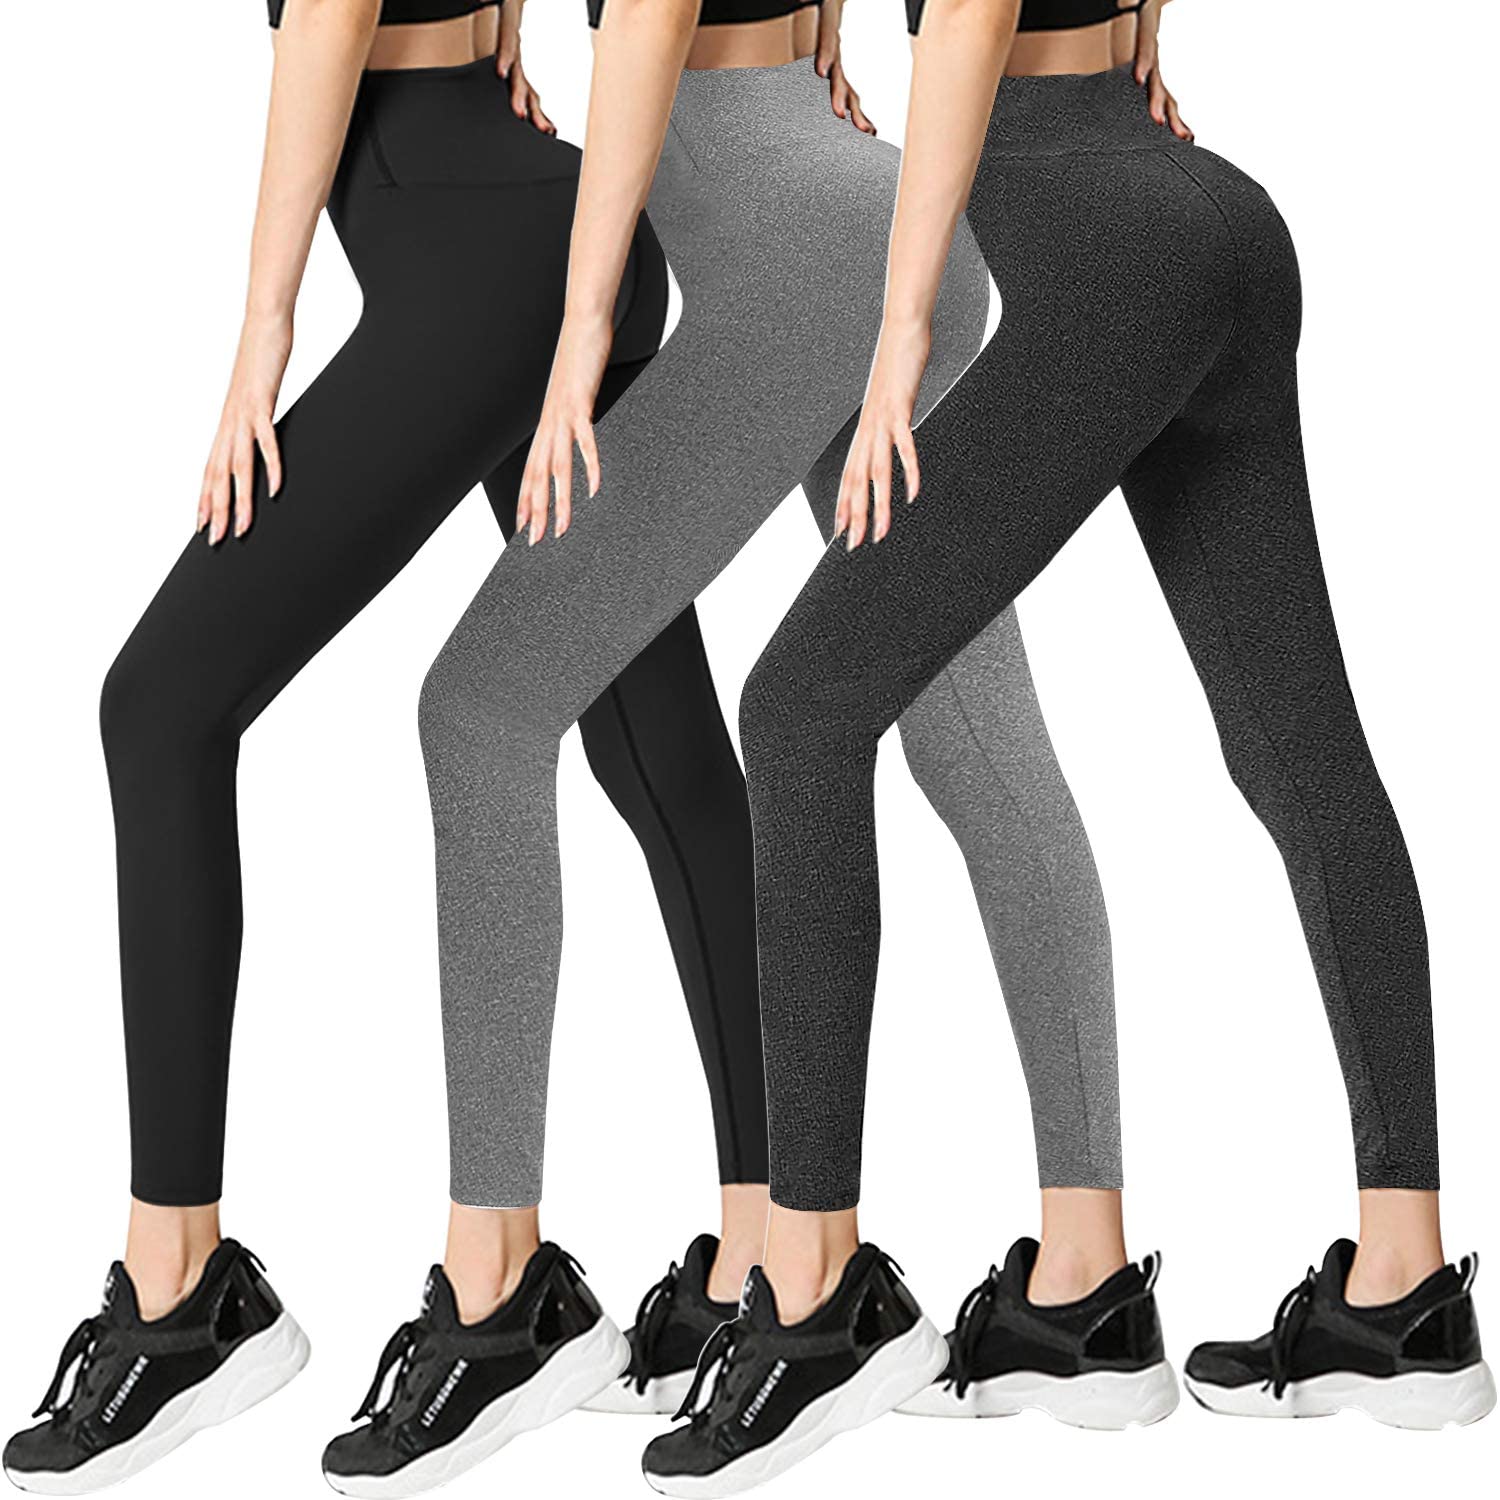 3 Pack High Waisted Leggings for Women No See Through Yoga Pants